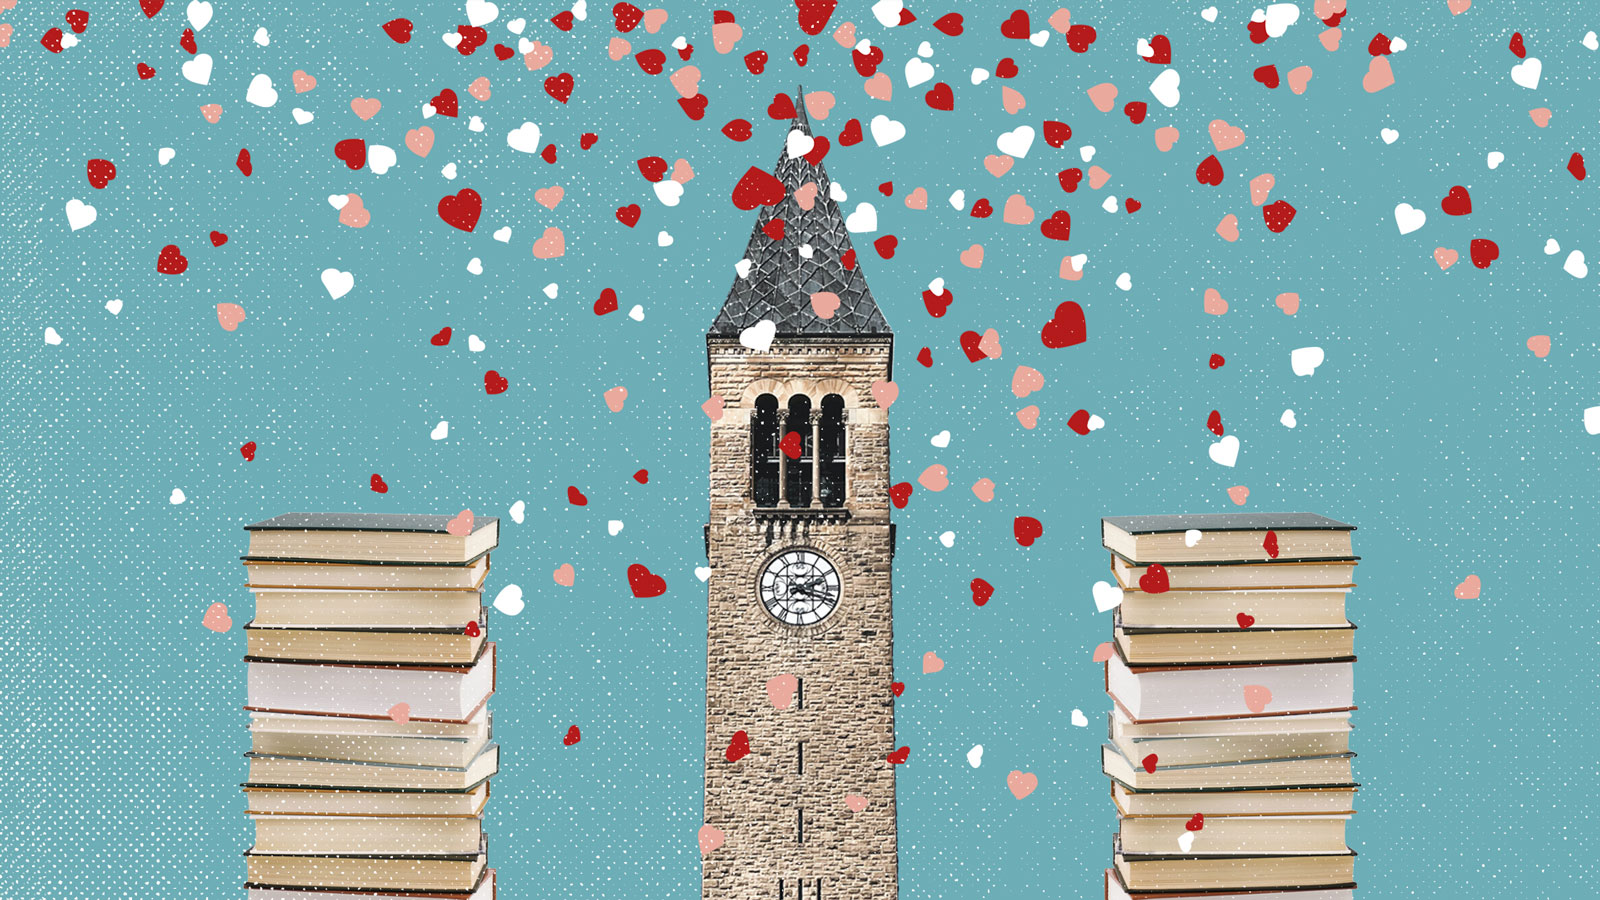 An illustration of two stacks of books, with the Cornell clocktower in the center, and pink, red, and white hearts in the air